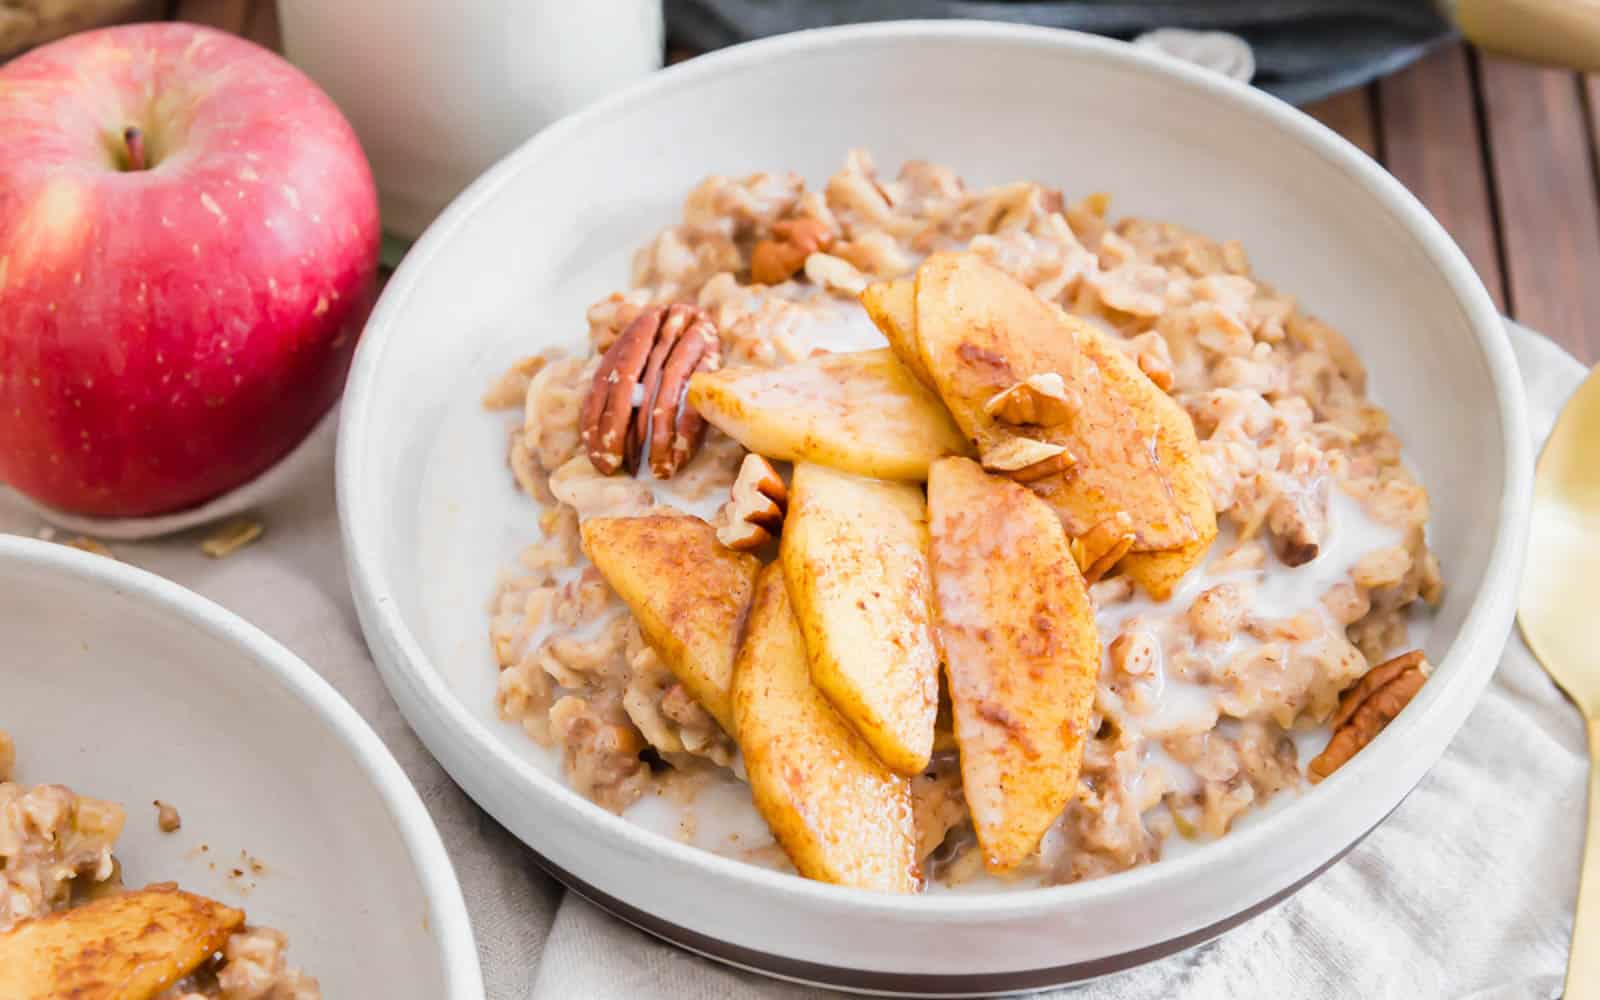 Creamy apple cinnamon oatmeal in a bowl with maple apple slices.